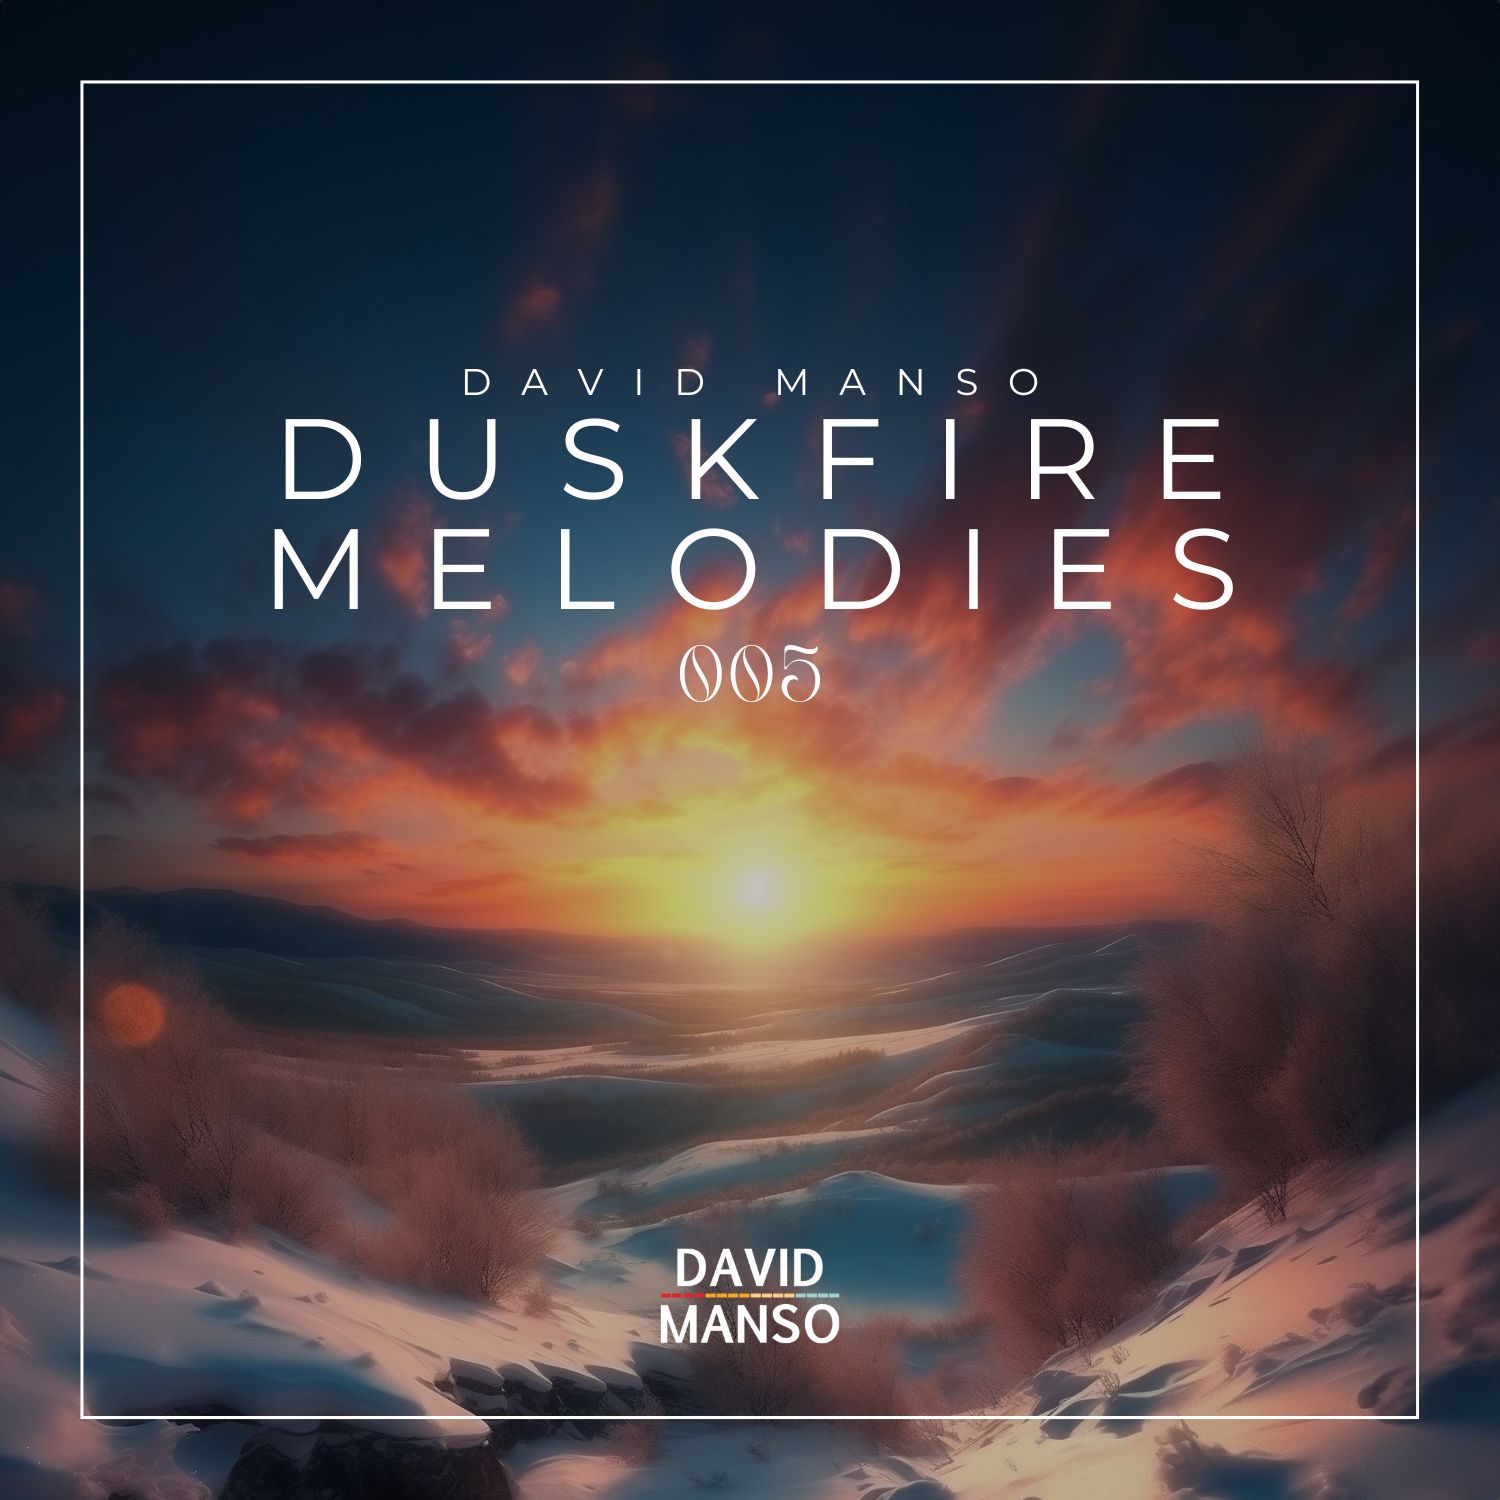 Duskfire Melodies by David Manso